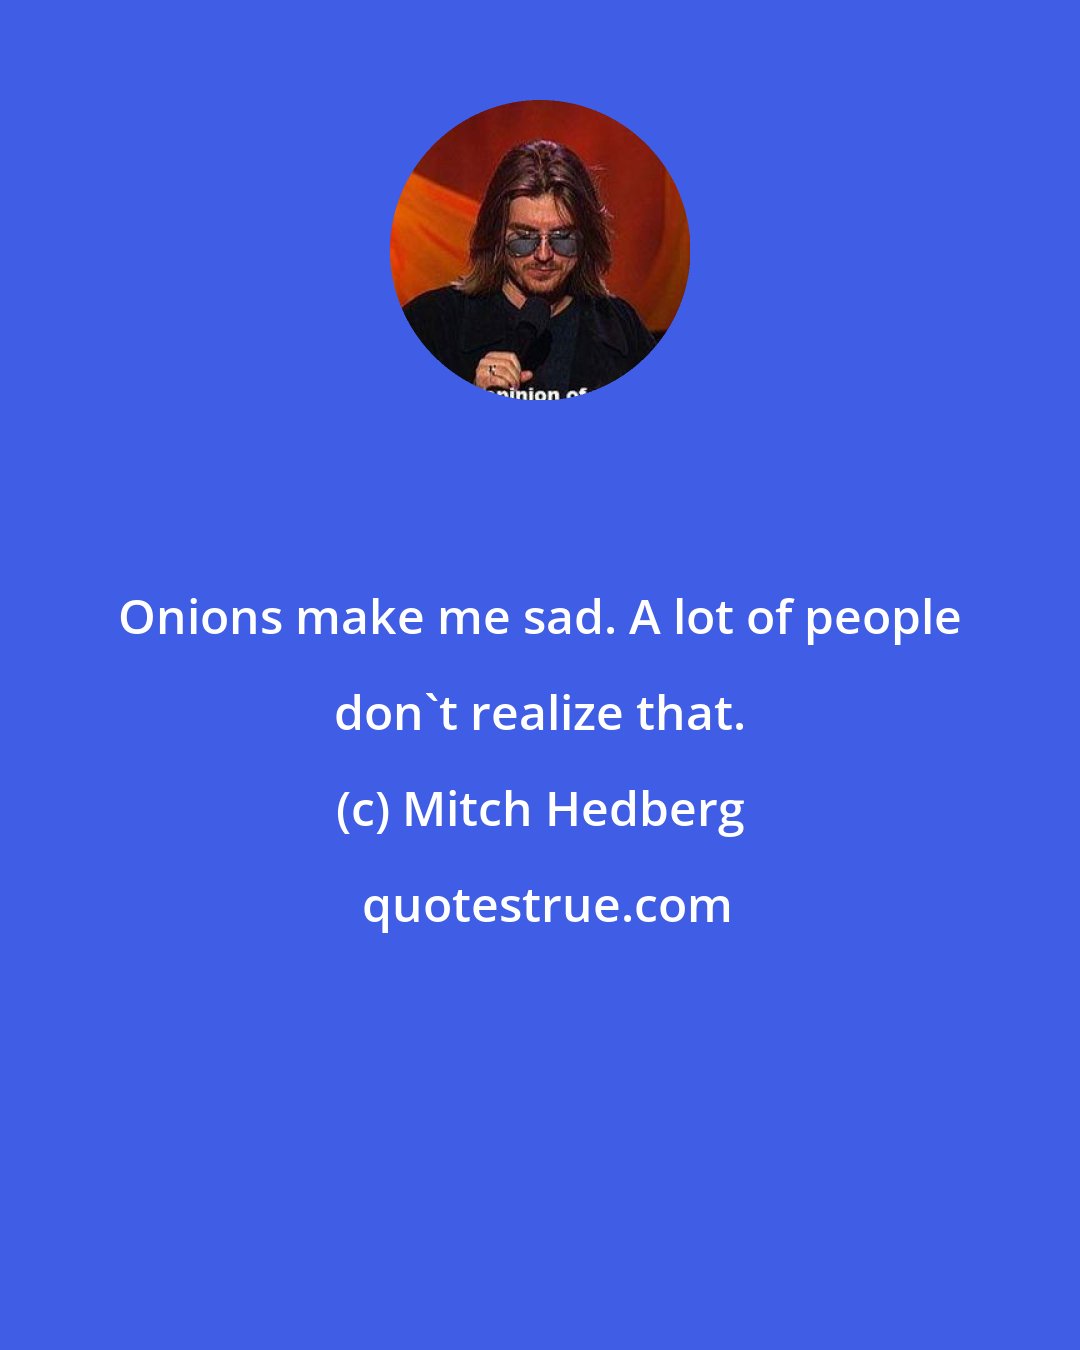 Mitch Hedberg: Onions make me sad. A lot of people don't realize that.